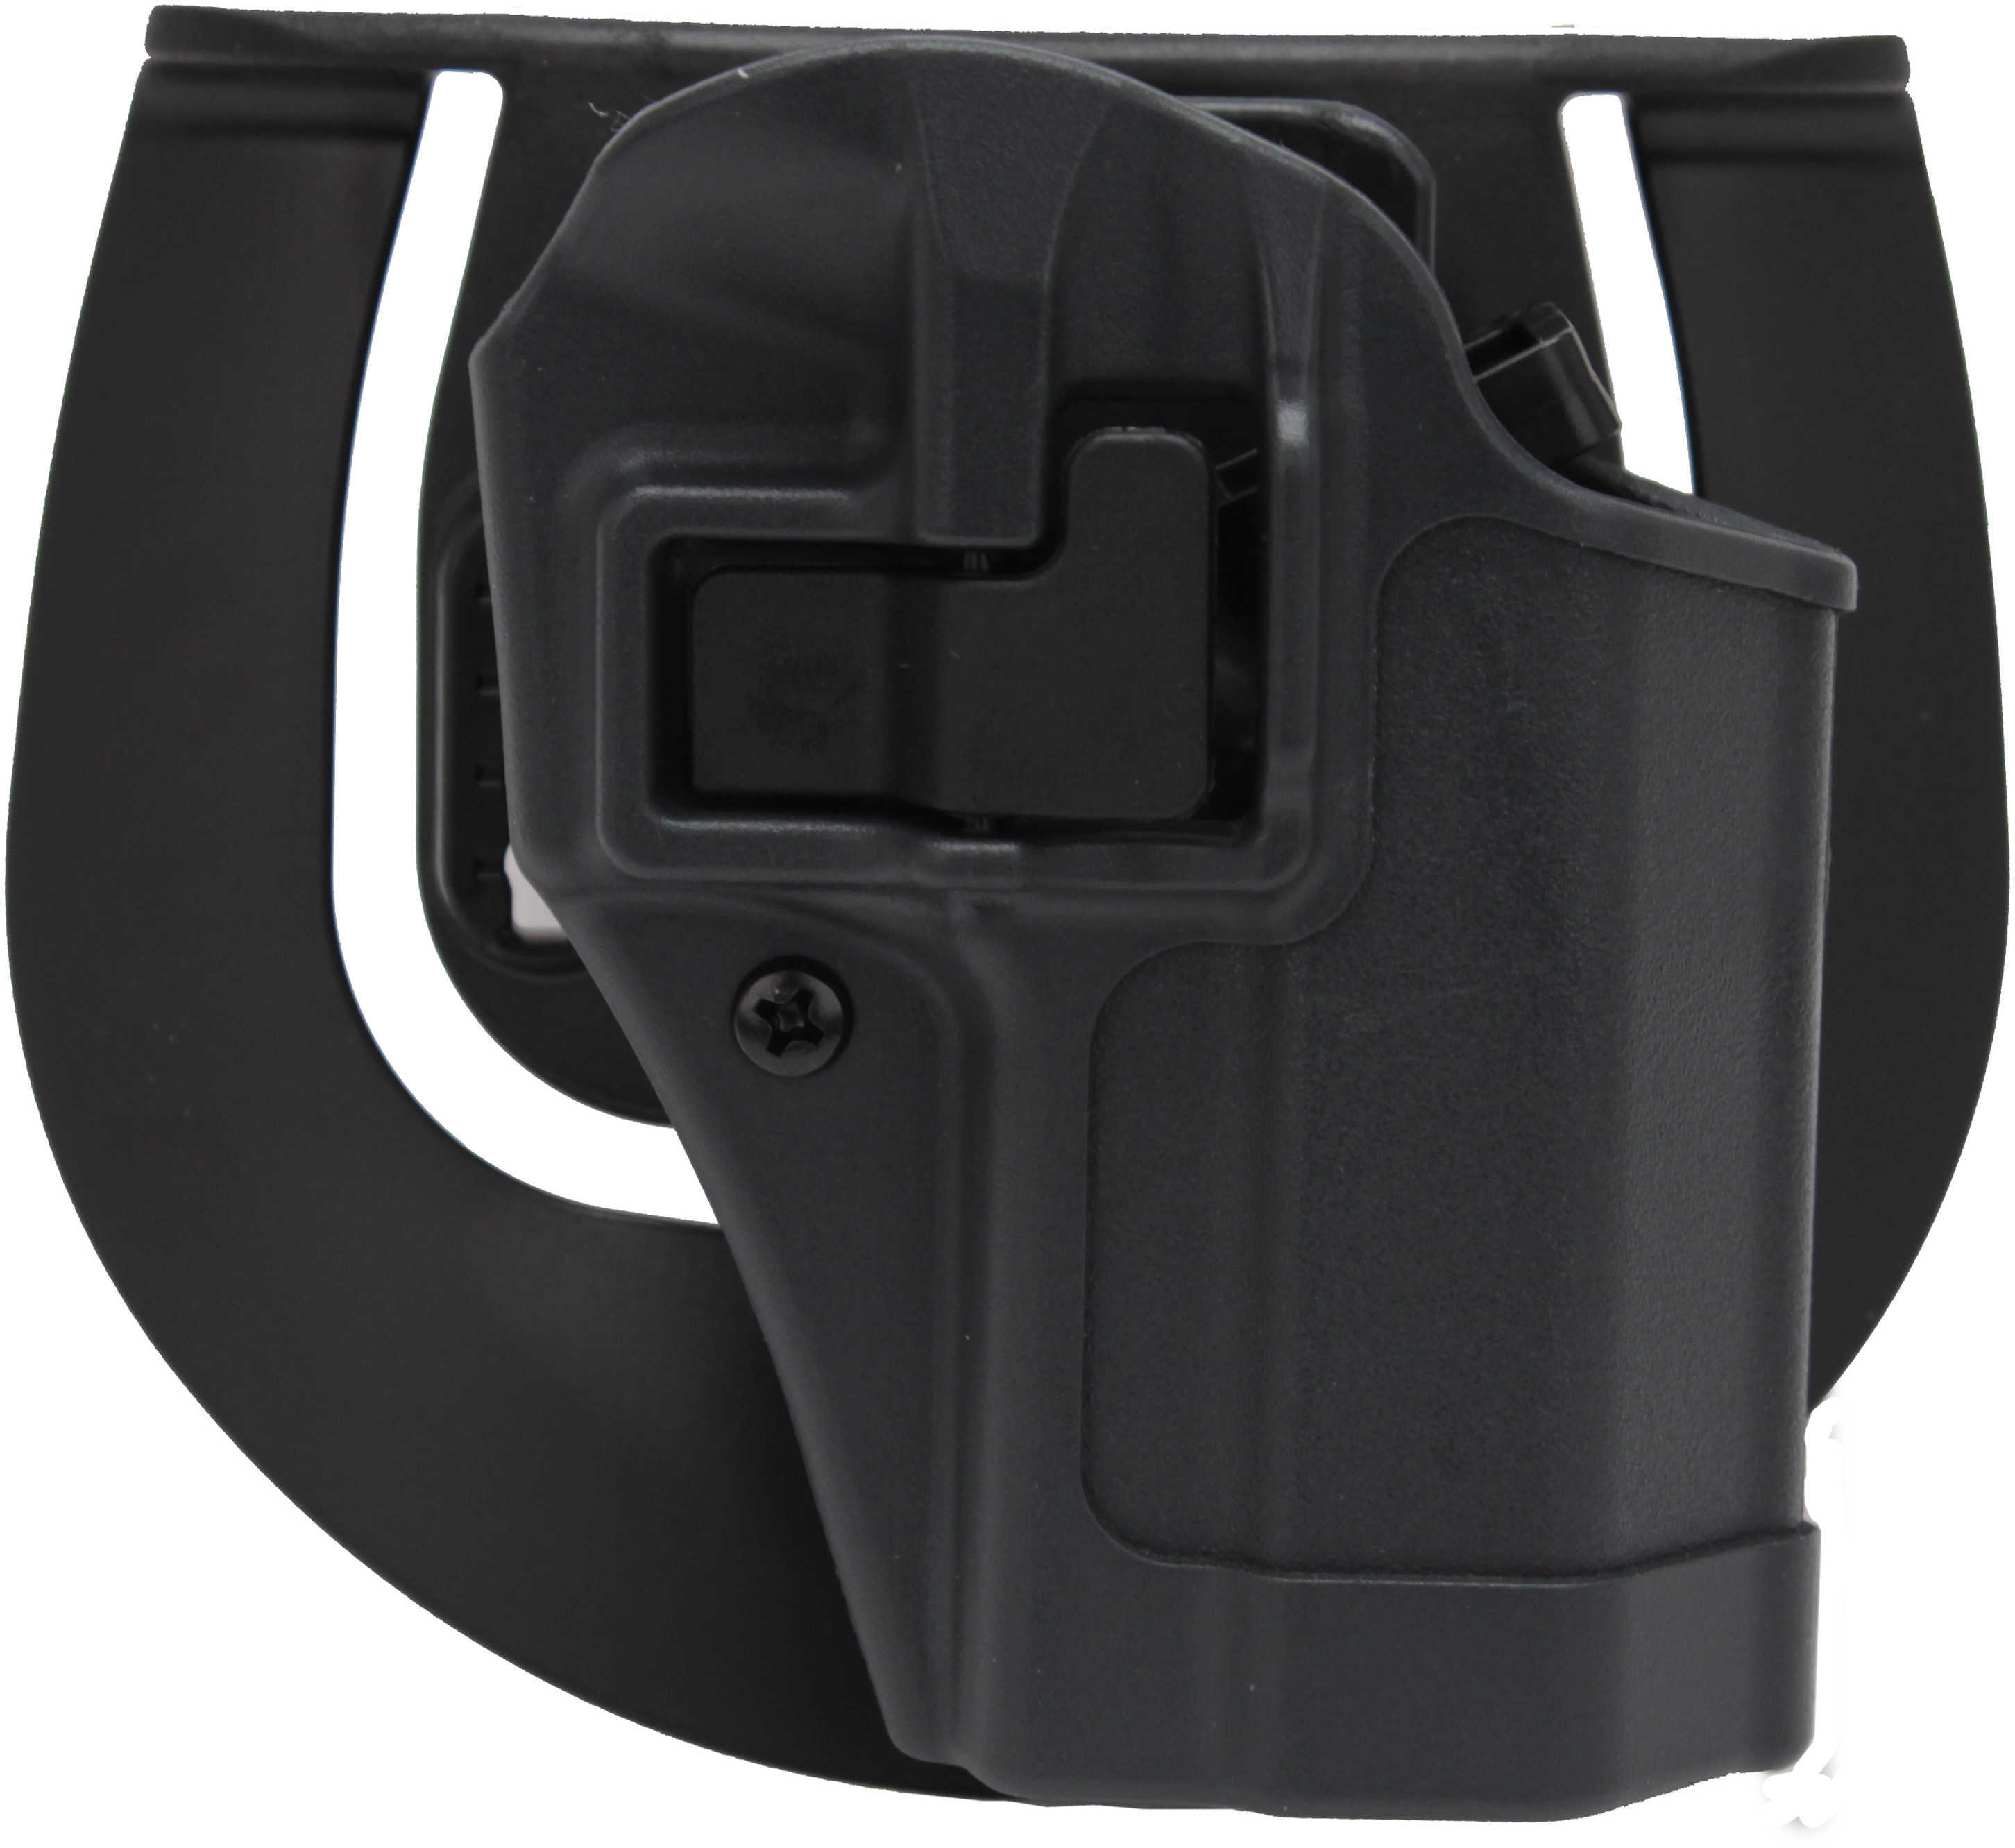 Blackhawk Serpa CQC Sportster Holster - Right Handed Size 05: Sig 228/229/250 Dc With Or Without Rails - Gun Metal Gray